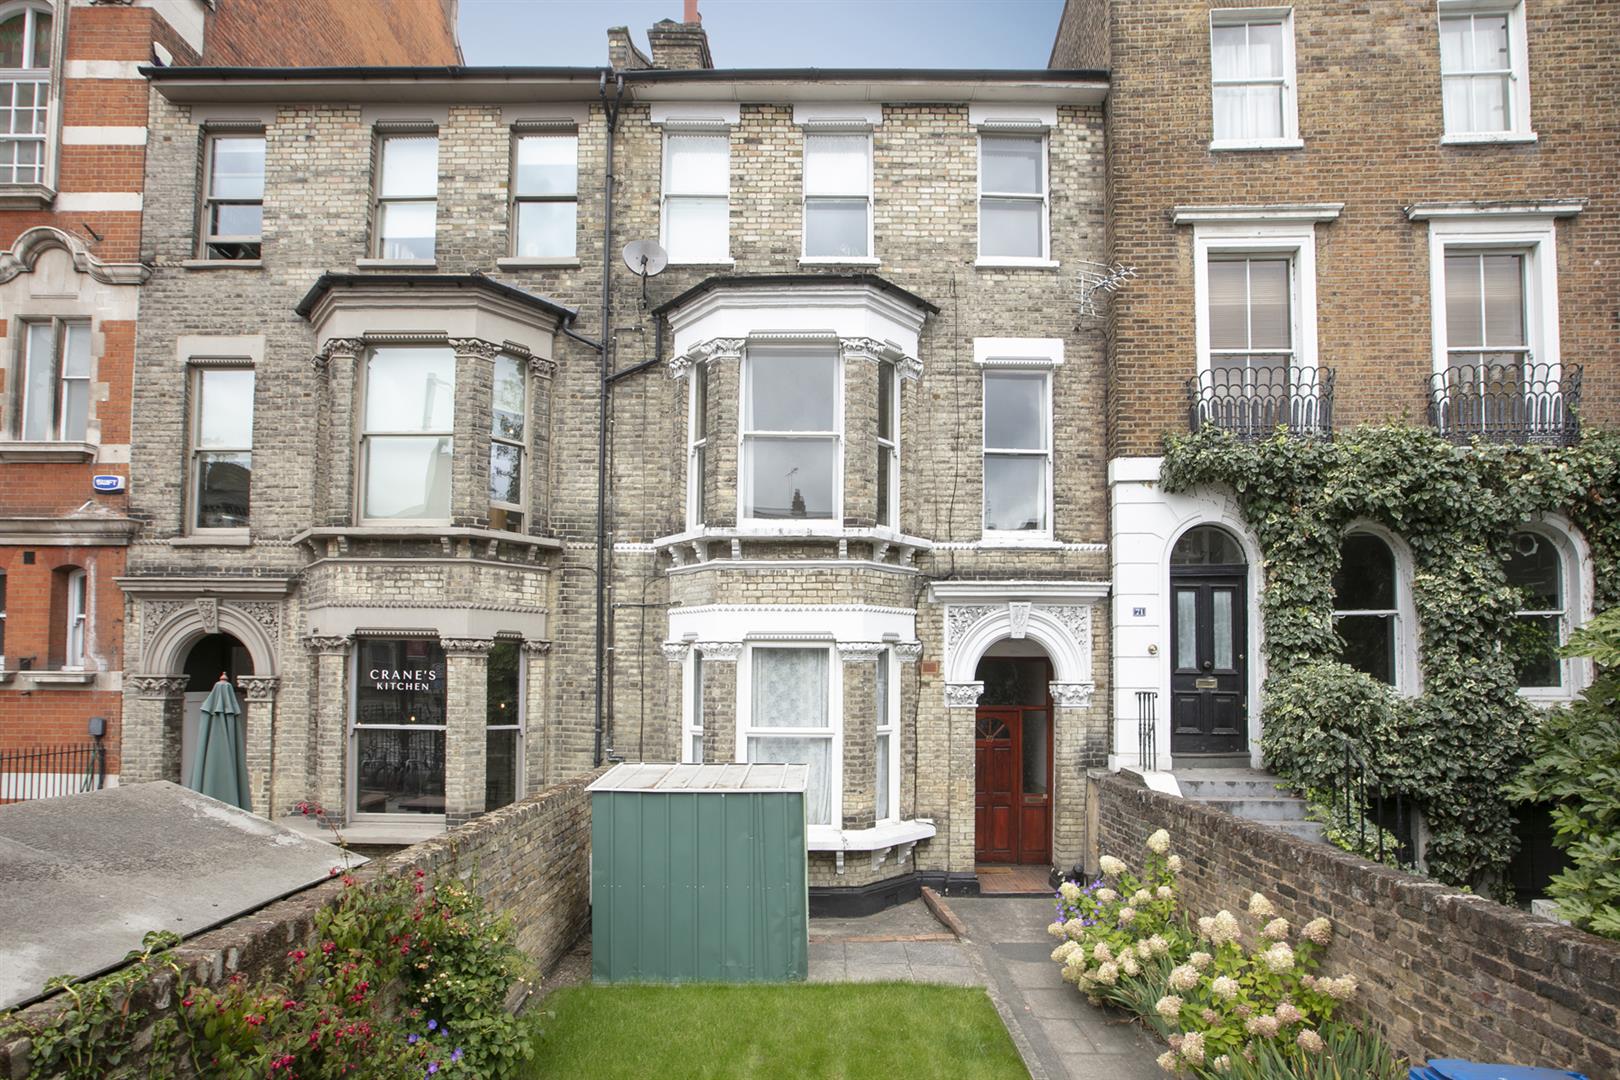 Flat - Conversion For Sale in Peckham Road, Camberwell, SE5 859 view13